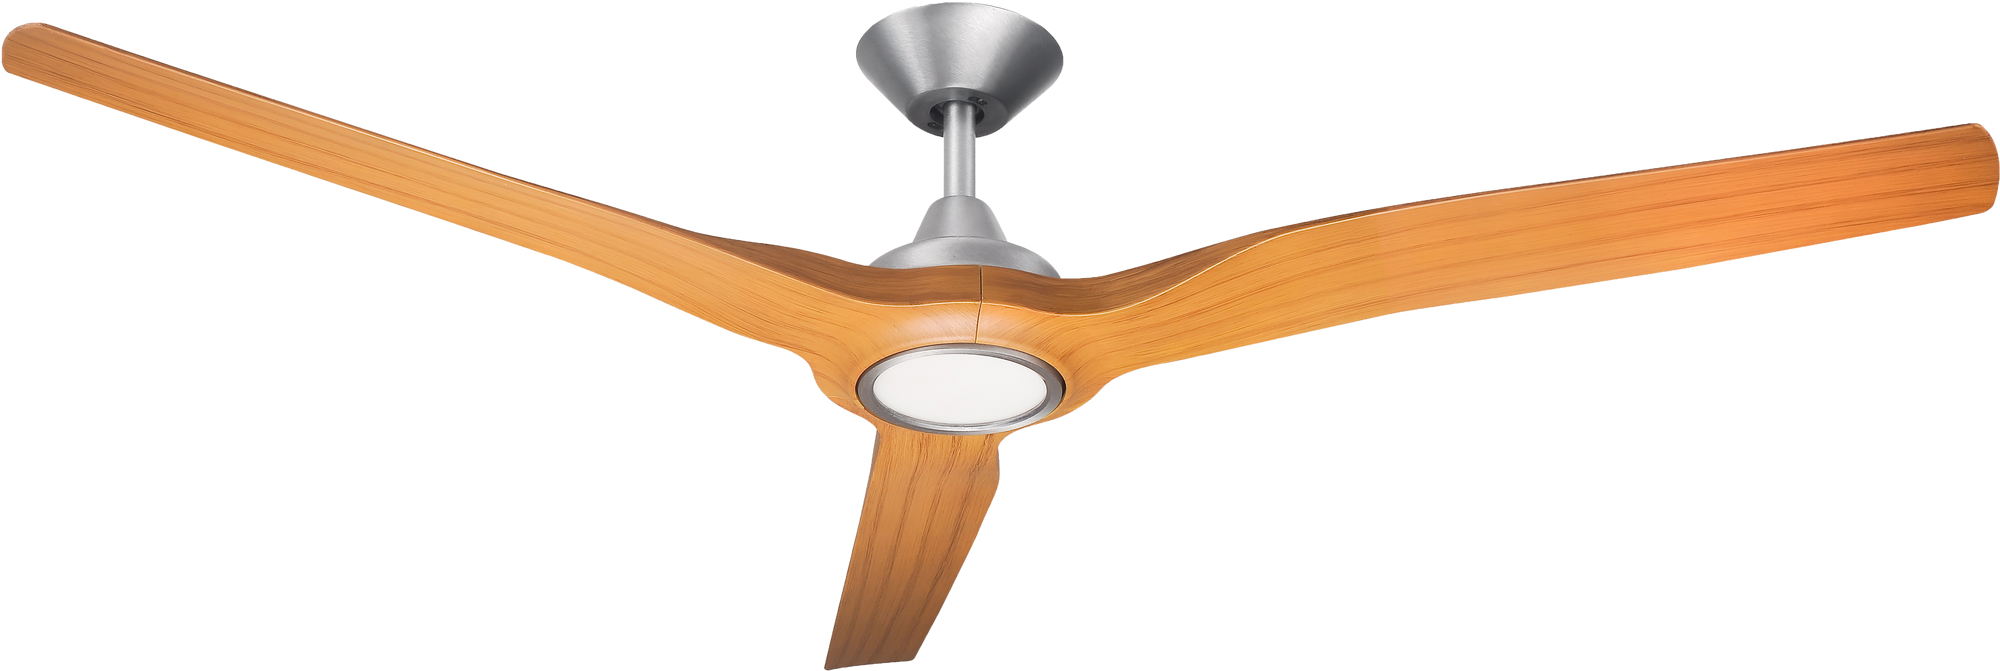 Radical 2 Brushed Aluminium 60" with Bamboo Blades with Light Ceiling Fan